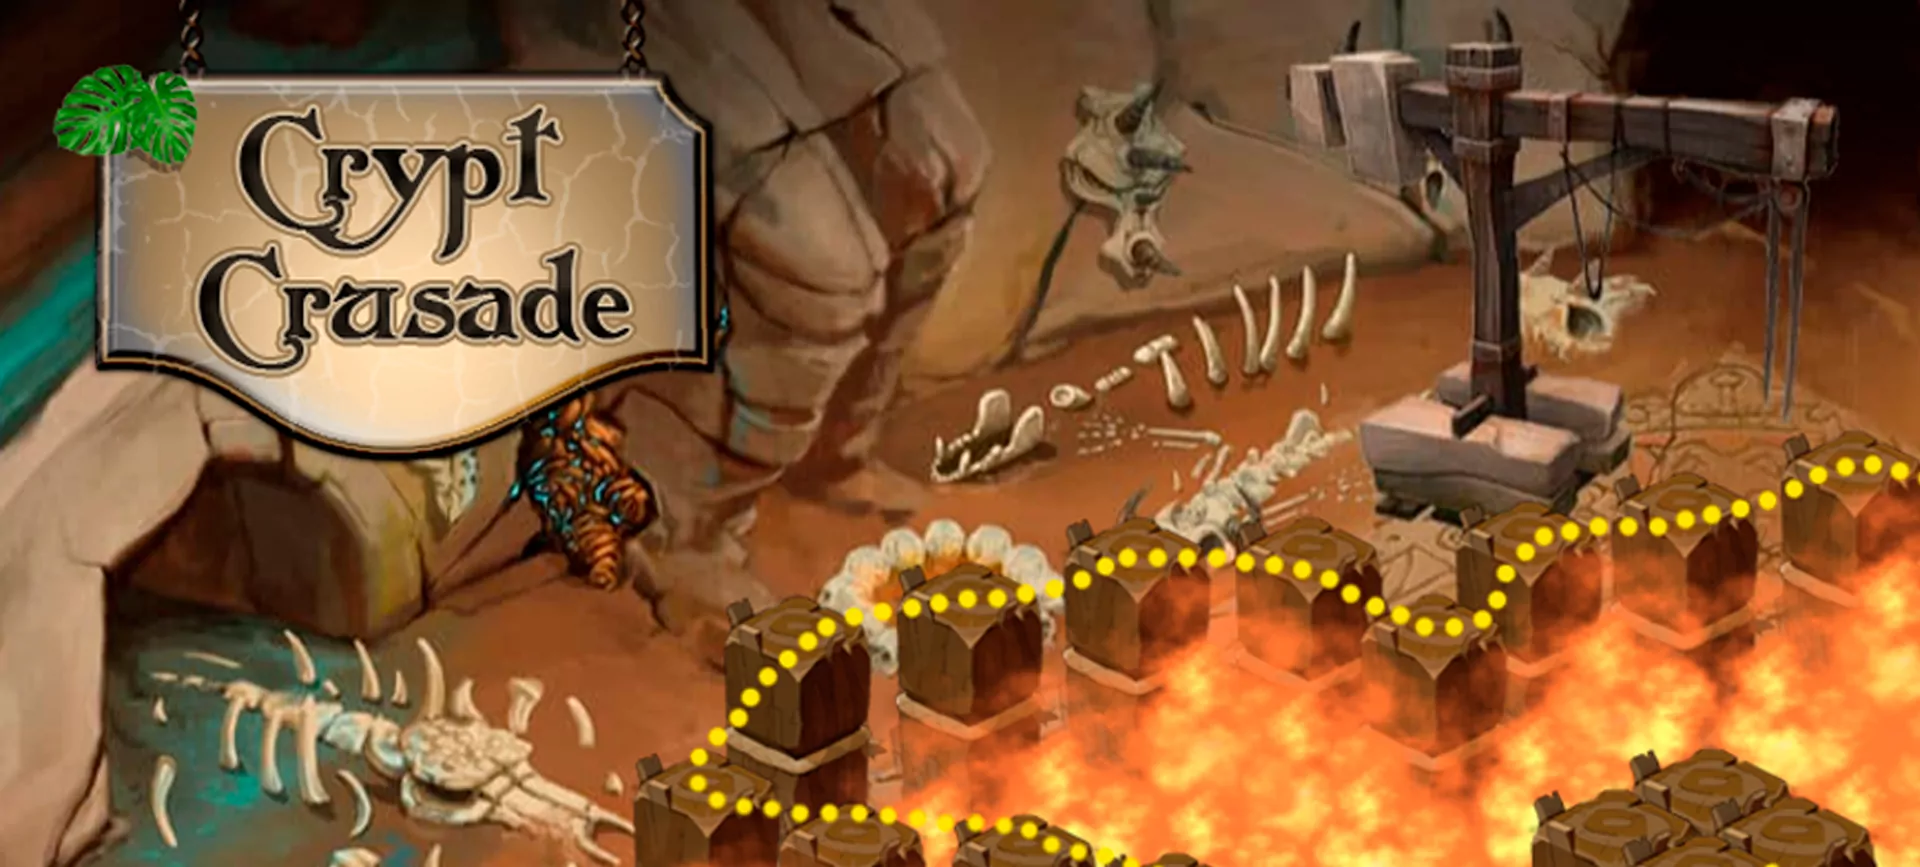 Play online in the Crypt Crusade game.